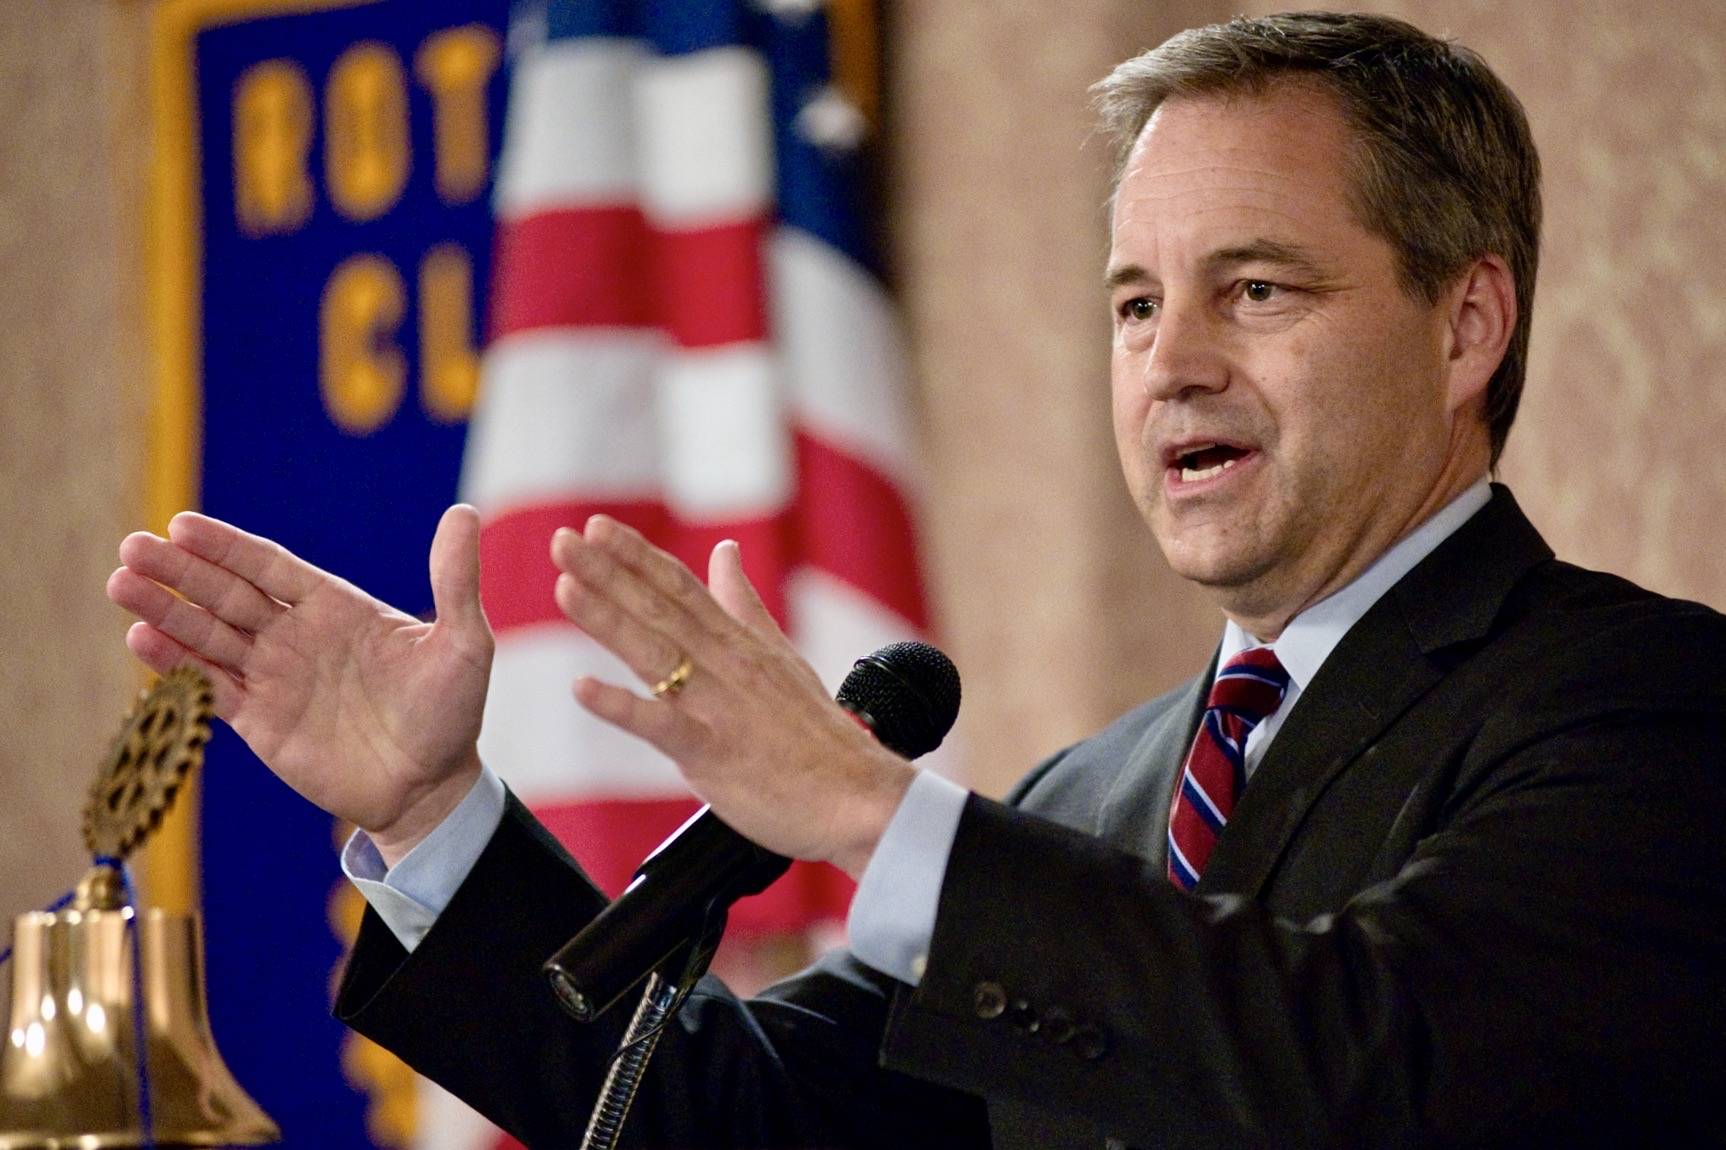 Gov. Sean Parnell speaks to the Downtown Rotary Club during their luncheon at the Baranof Hotel in 2011. (Michael Penn | Juneau Empire File)